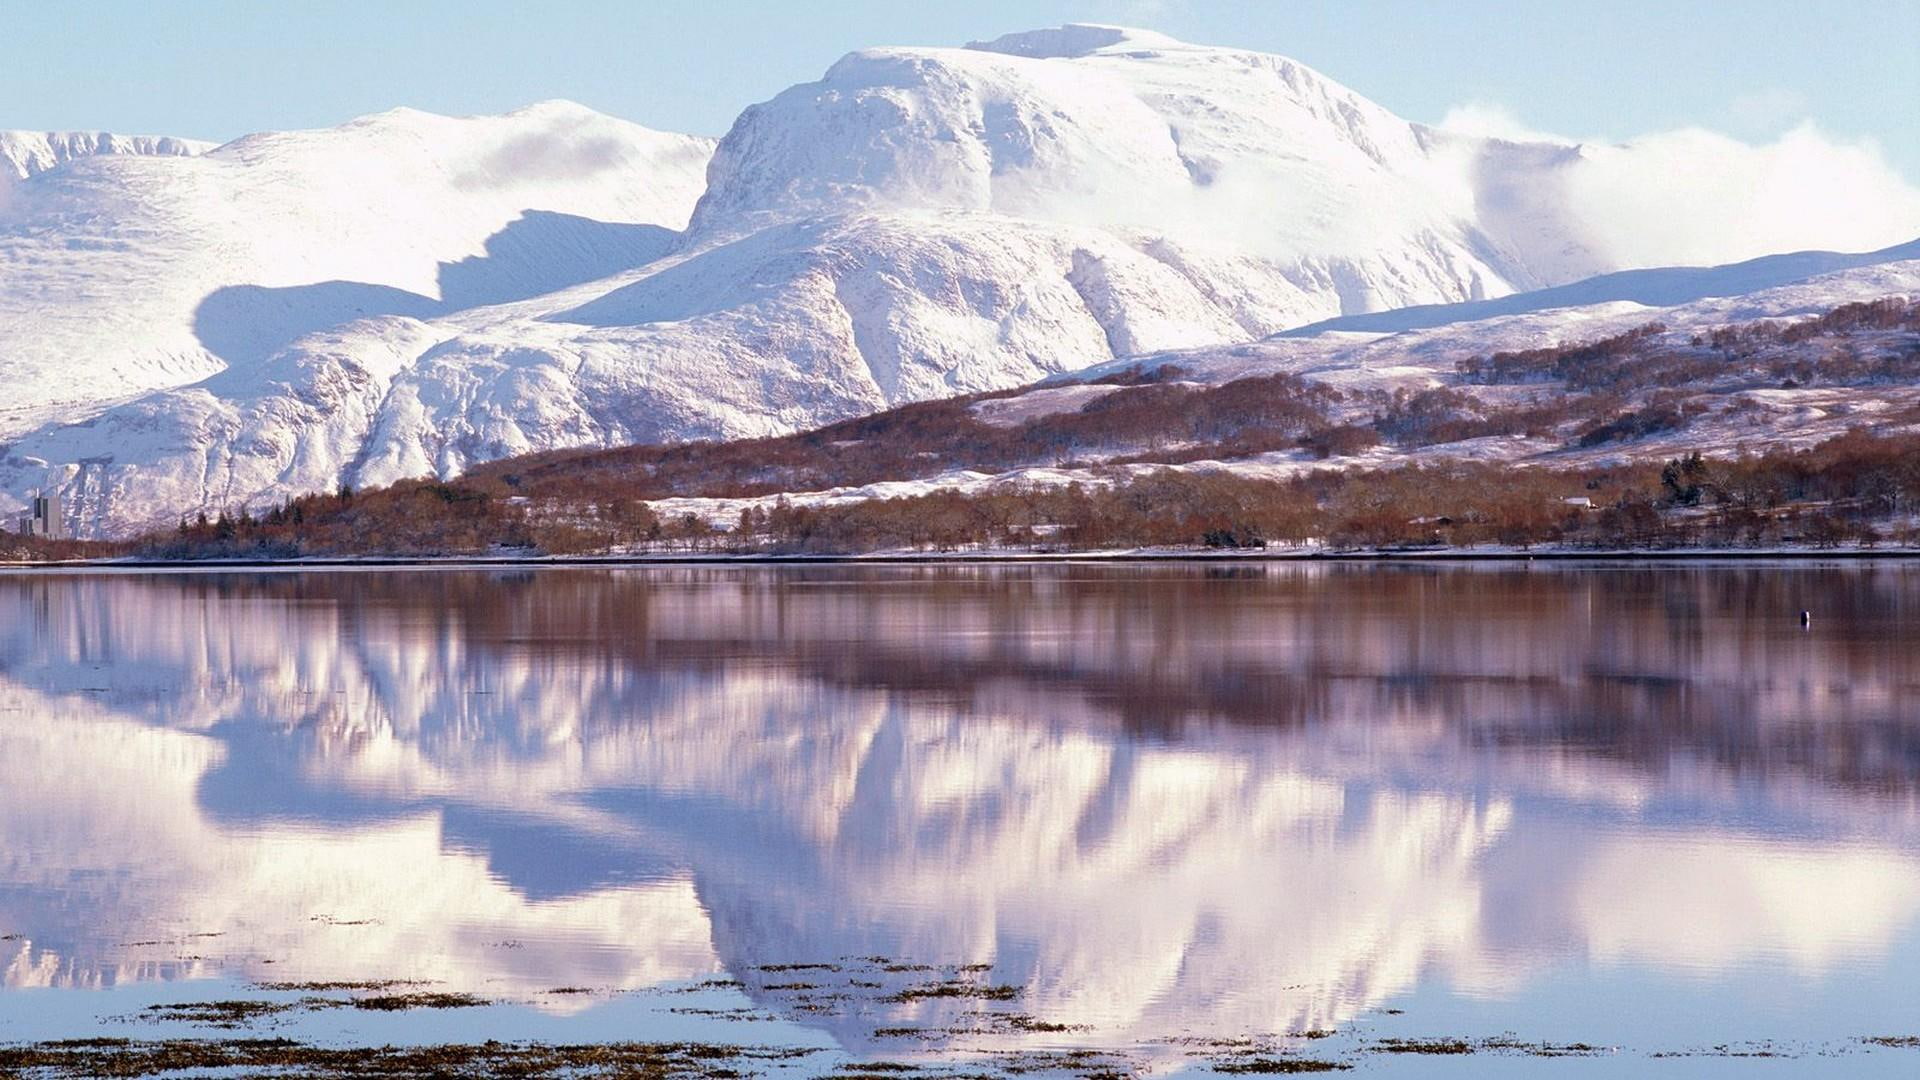 Ben Nevis Tallest Mountain In Scotl, reflection, snow, lake, nature and landscapes